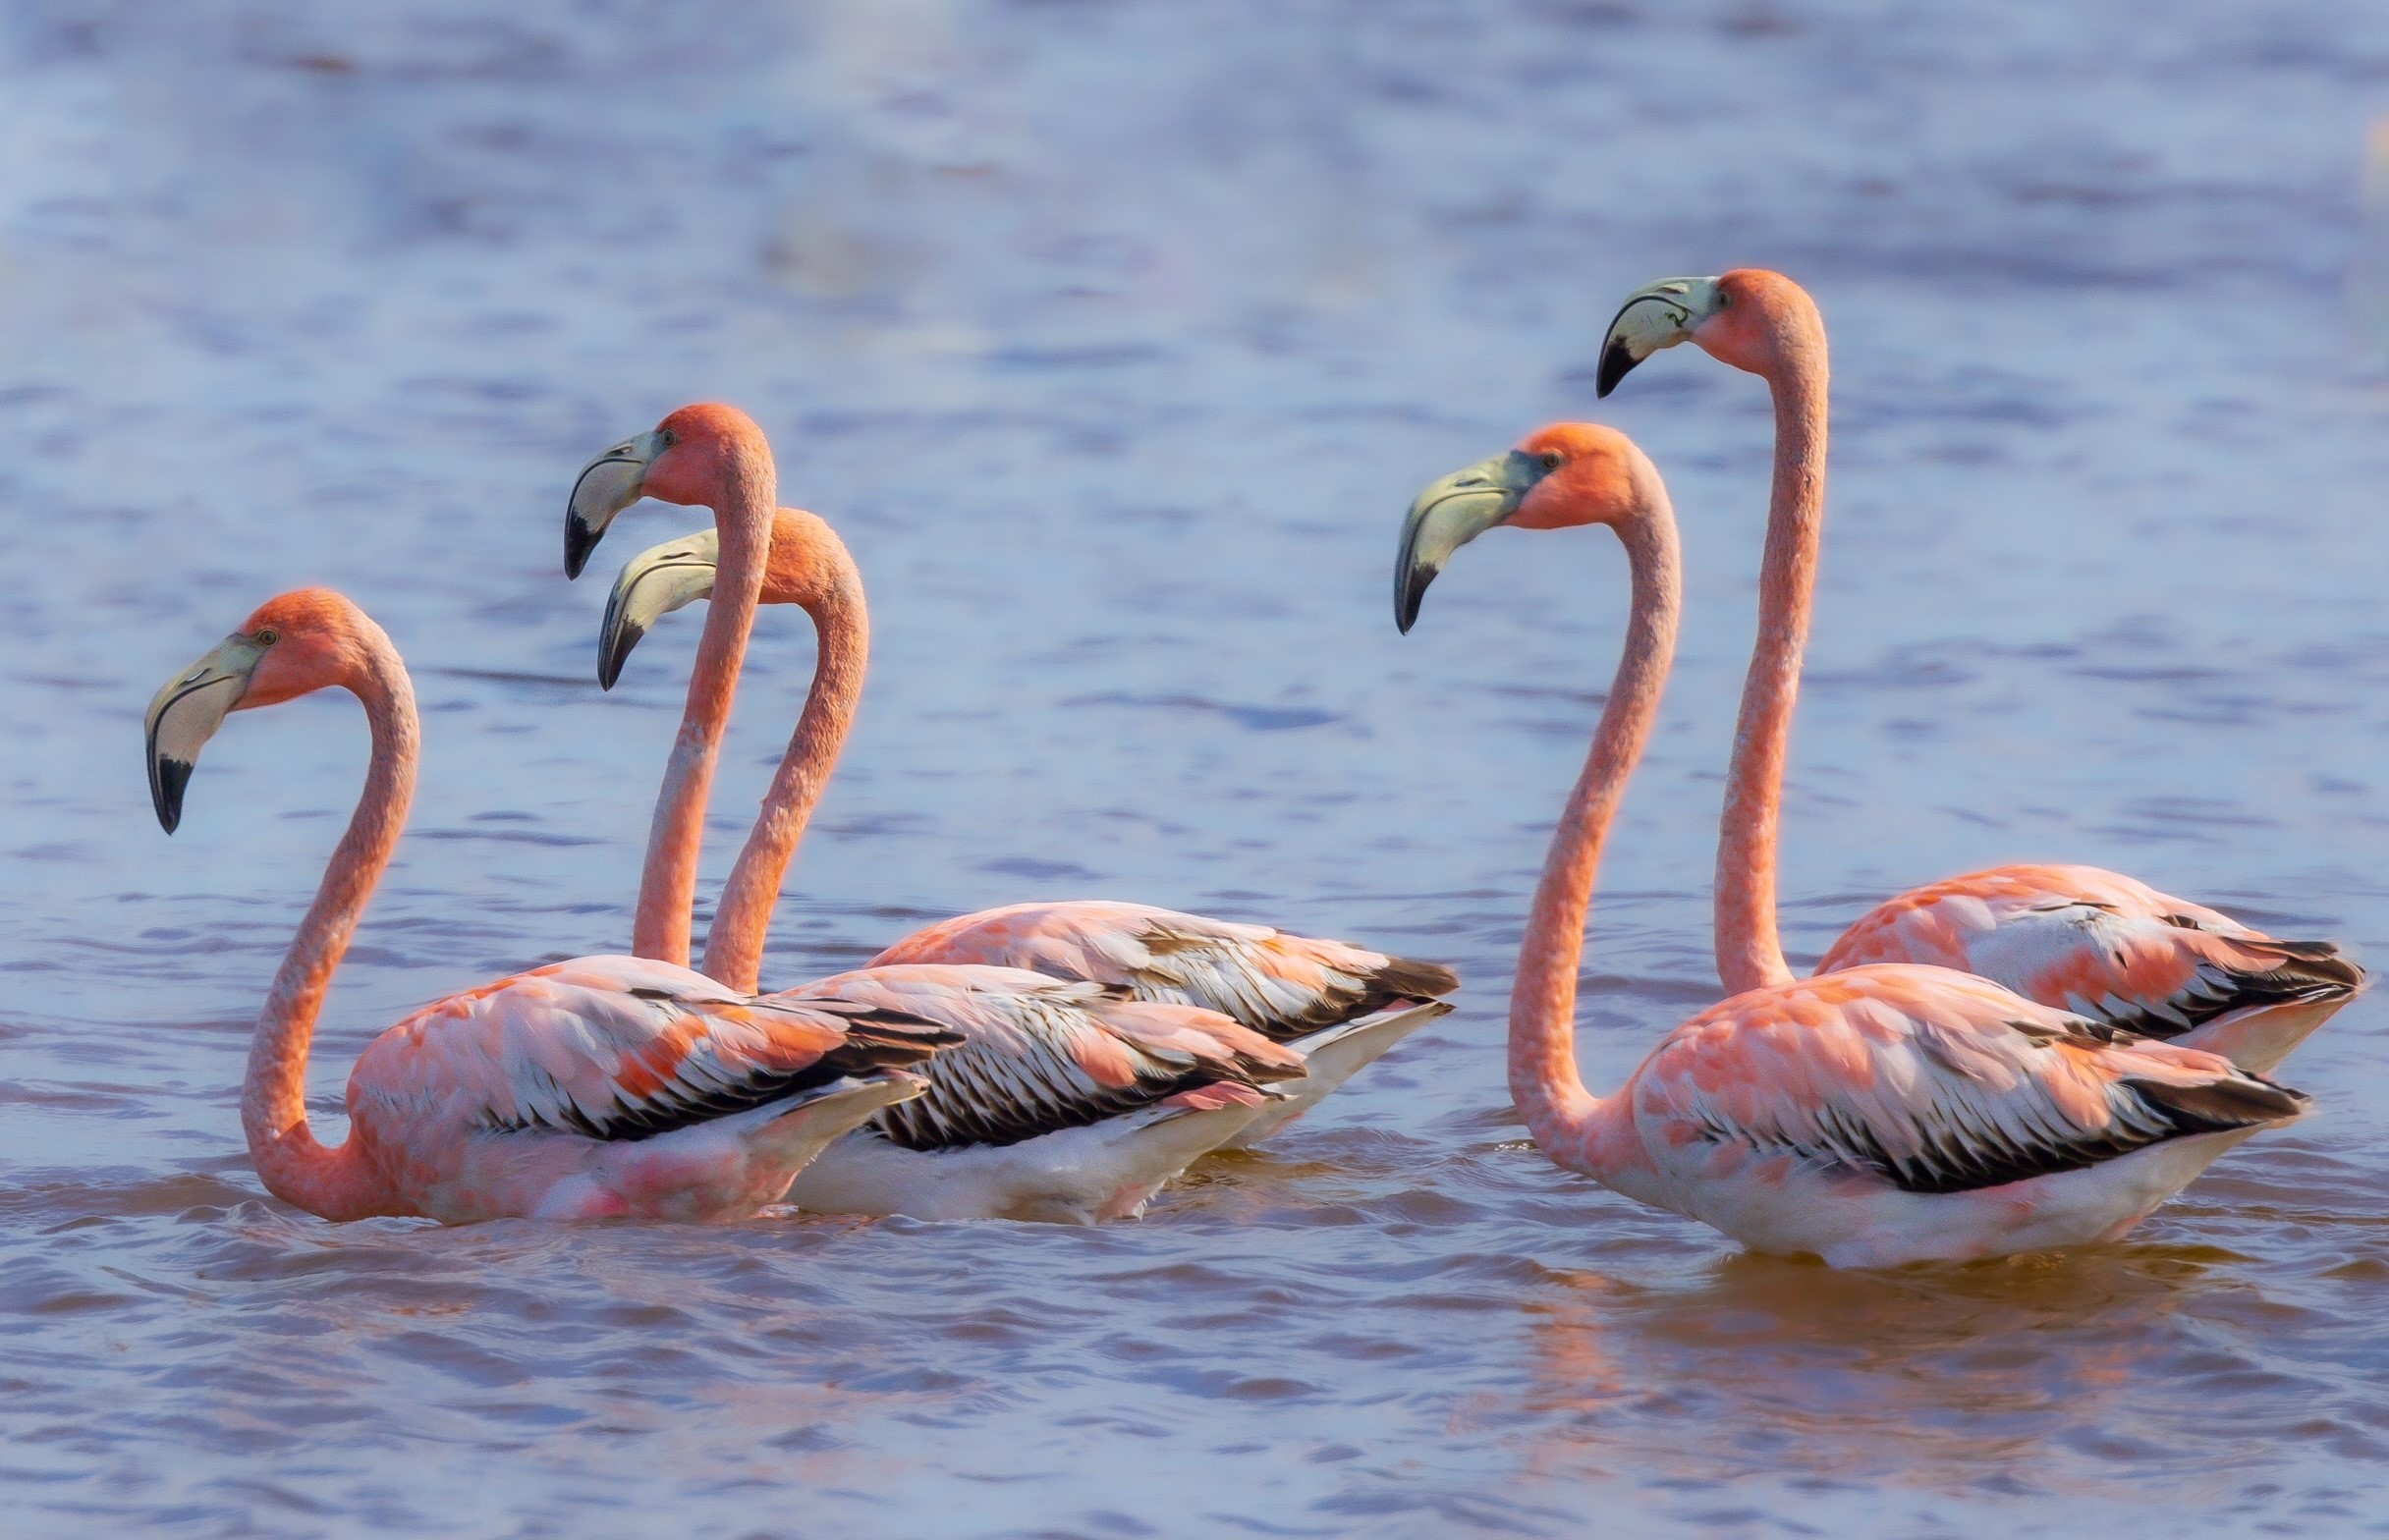 A flock of flamingos in the water.